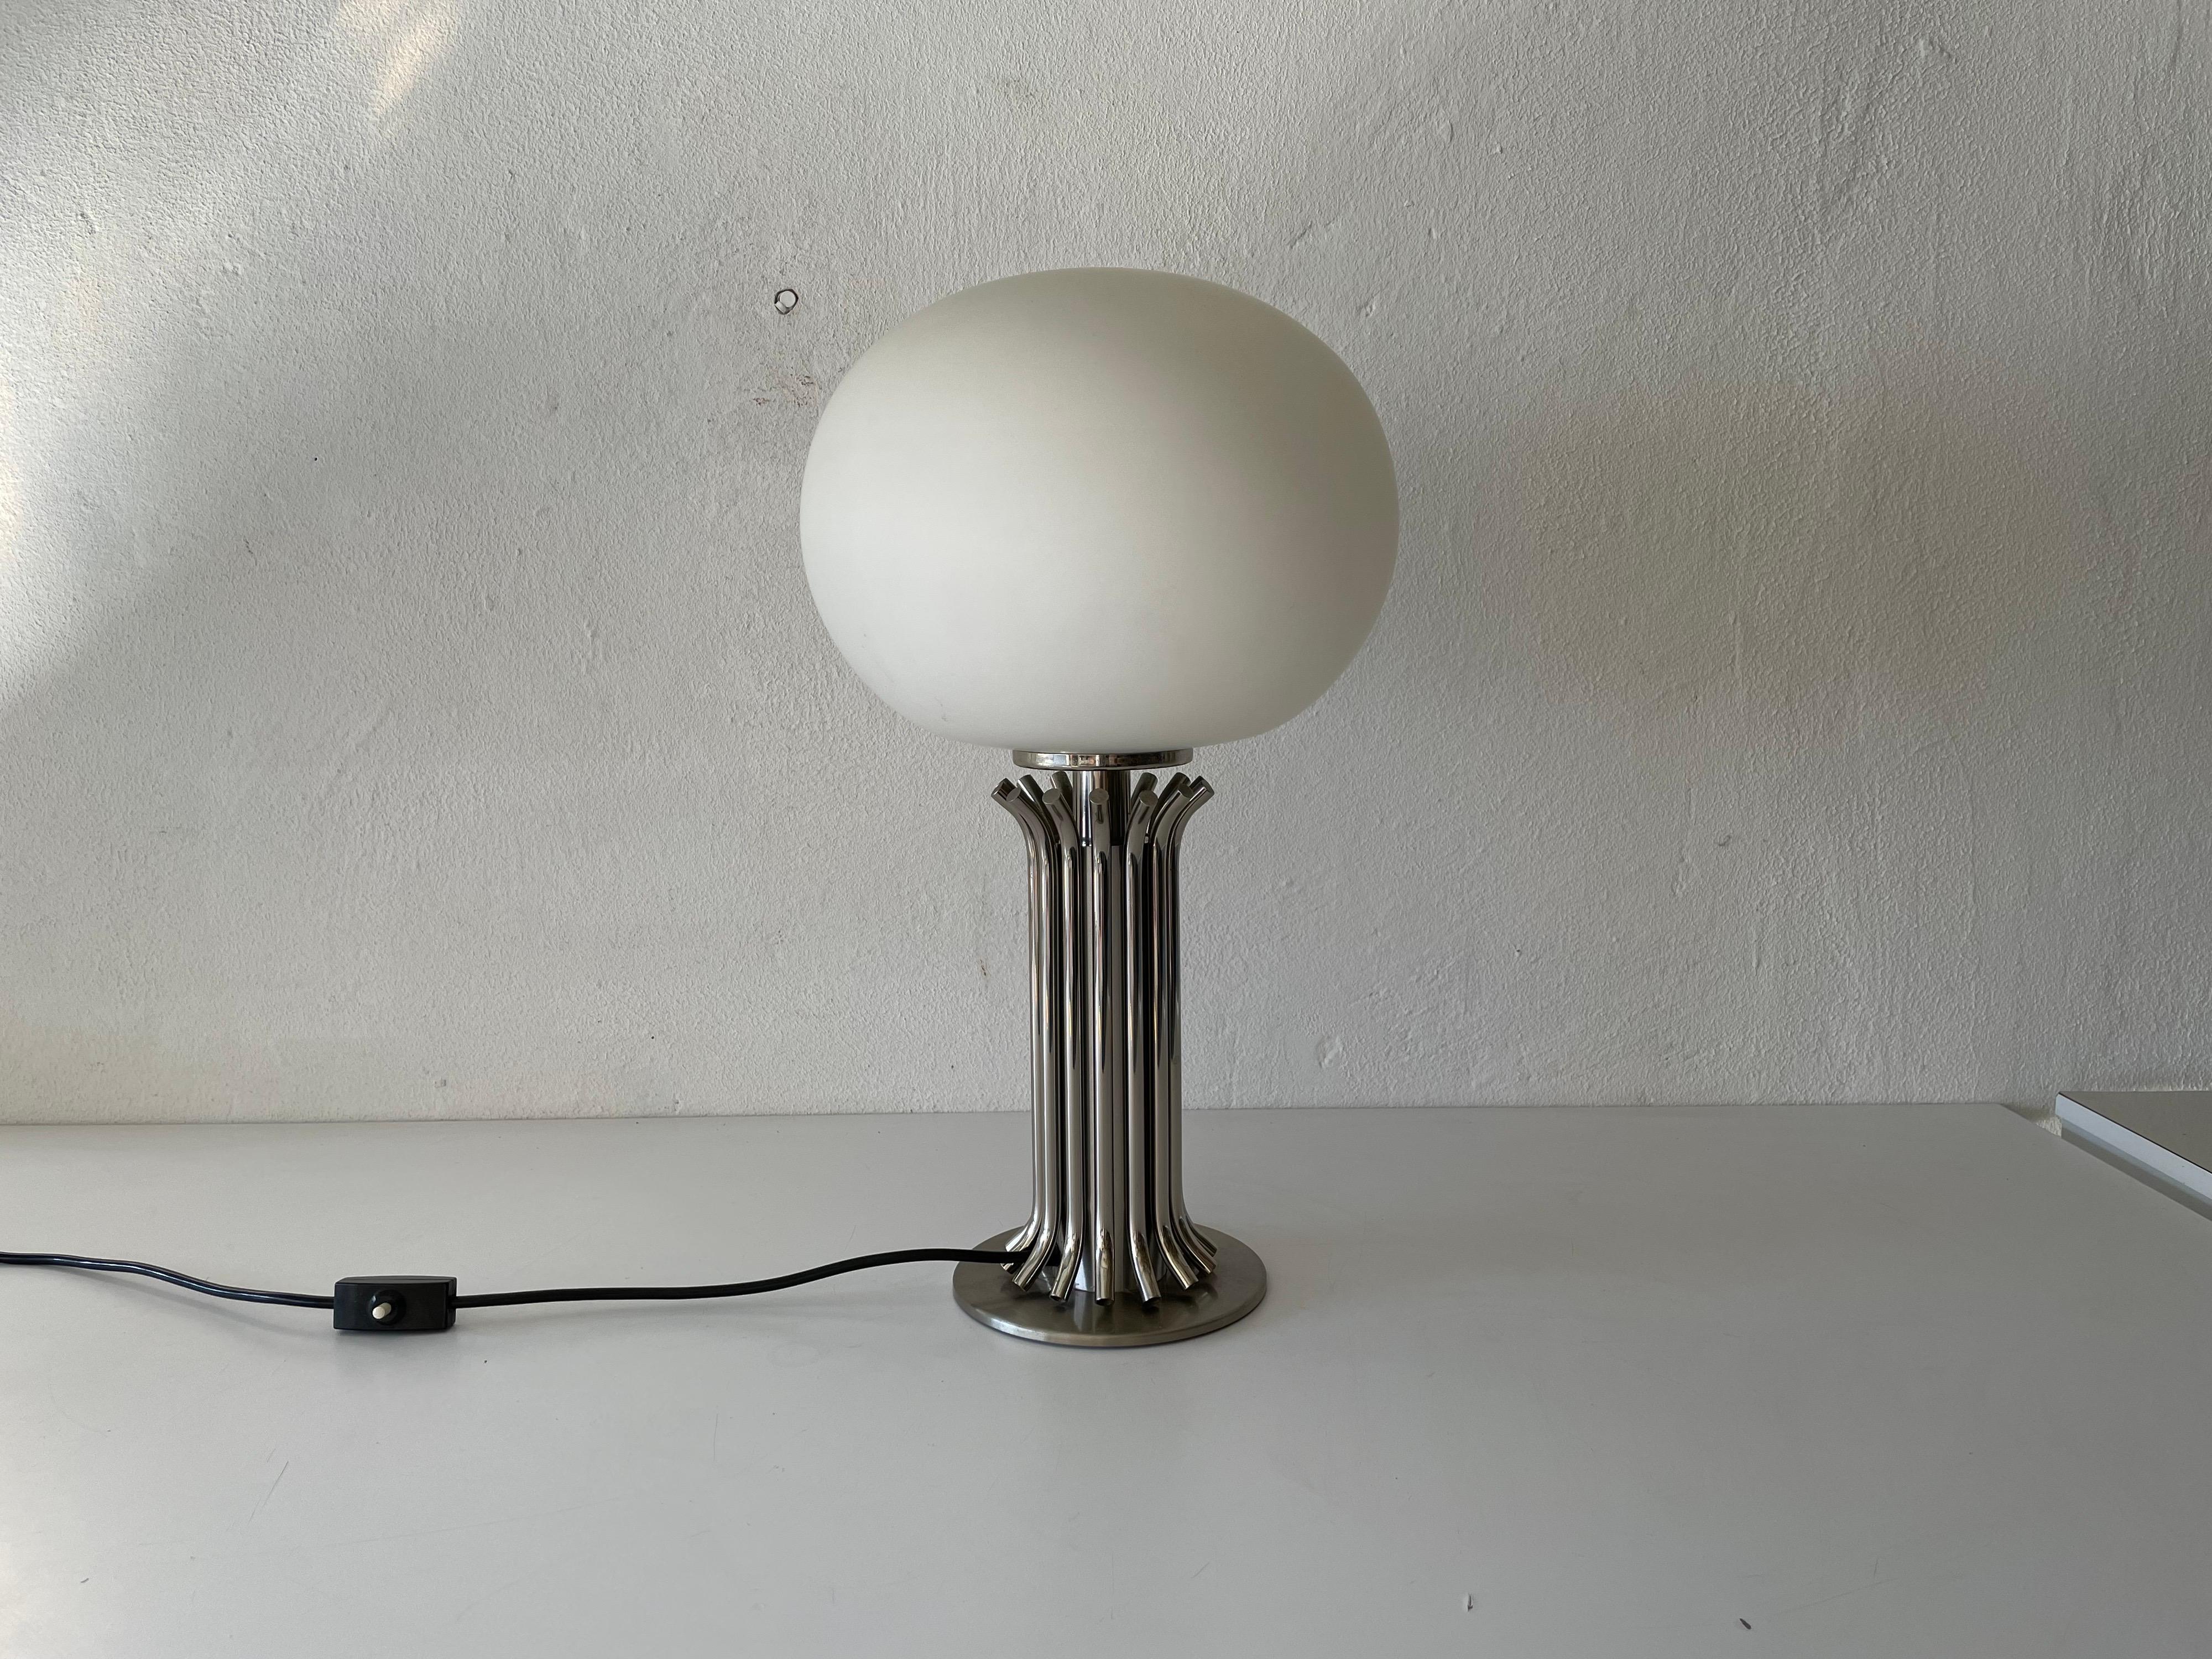 Exclusive Italian design chrome and opal glass table lamp, 1970s, Italy

Lampshade is in very good vintage condition.

This lamp works with E27 light bulb. 
Wired and suitable to use with 220V and 110V for all